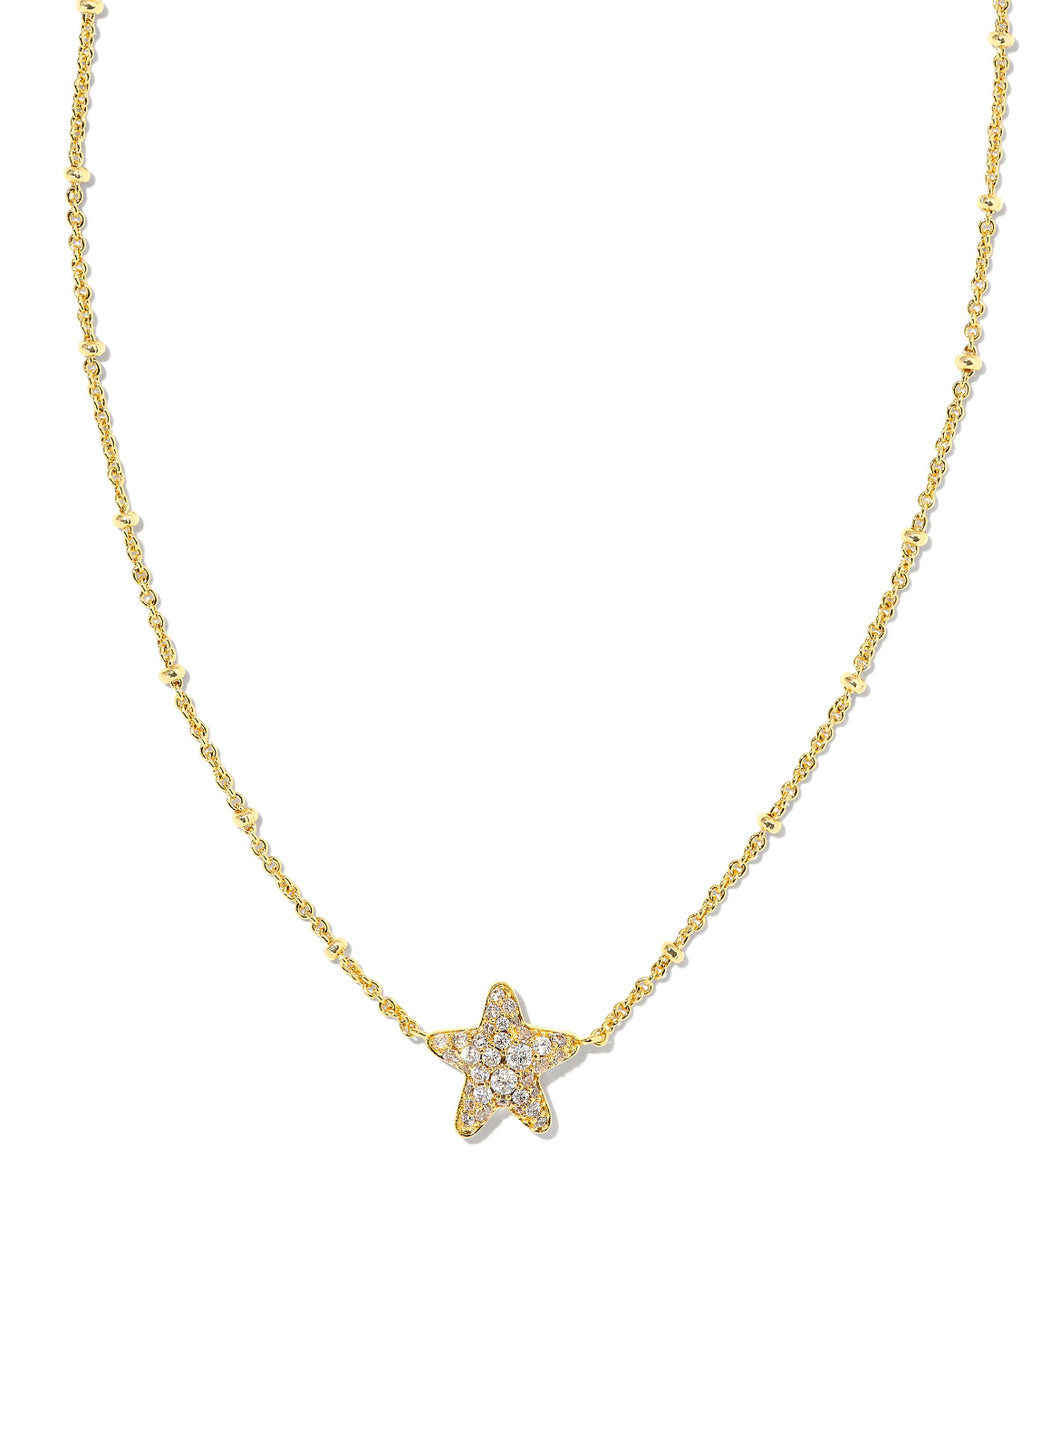 Kendra Scott: Jae Star Pave Short Pendant Necklace in Gold White Crystal